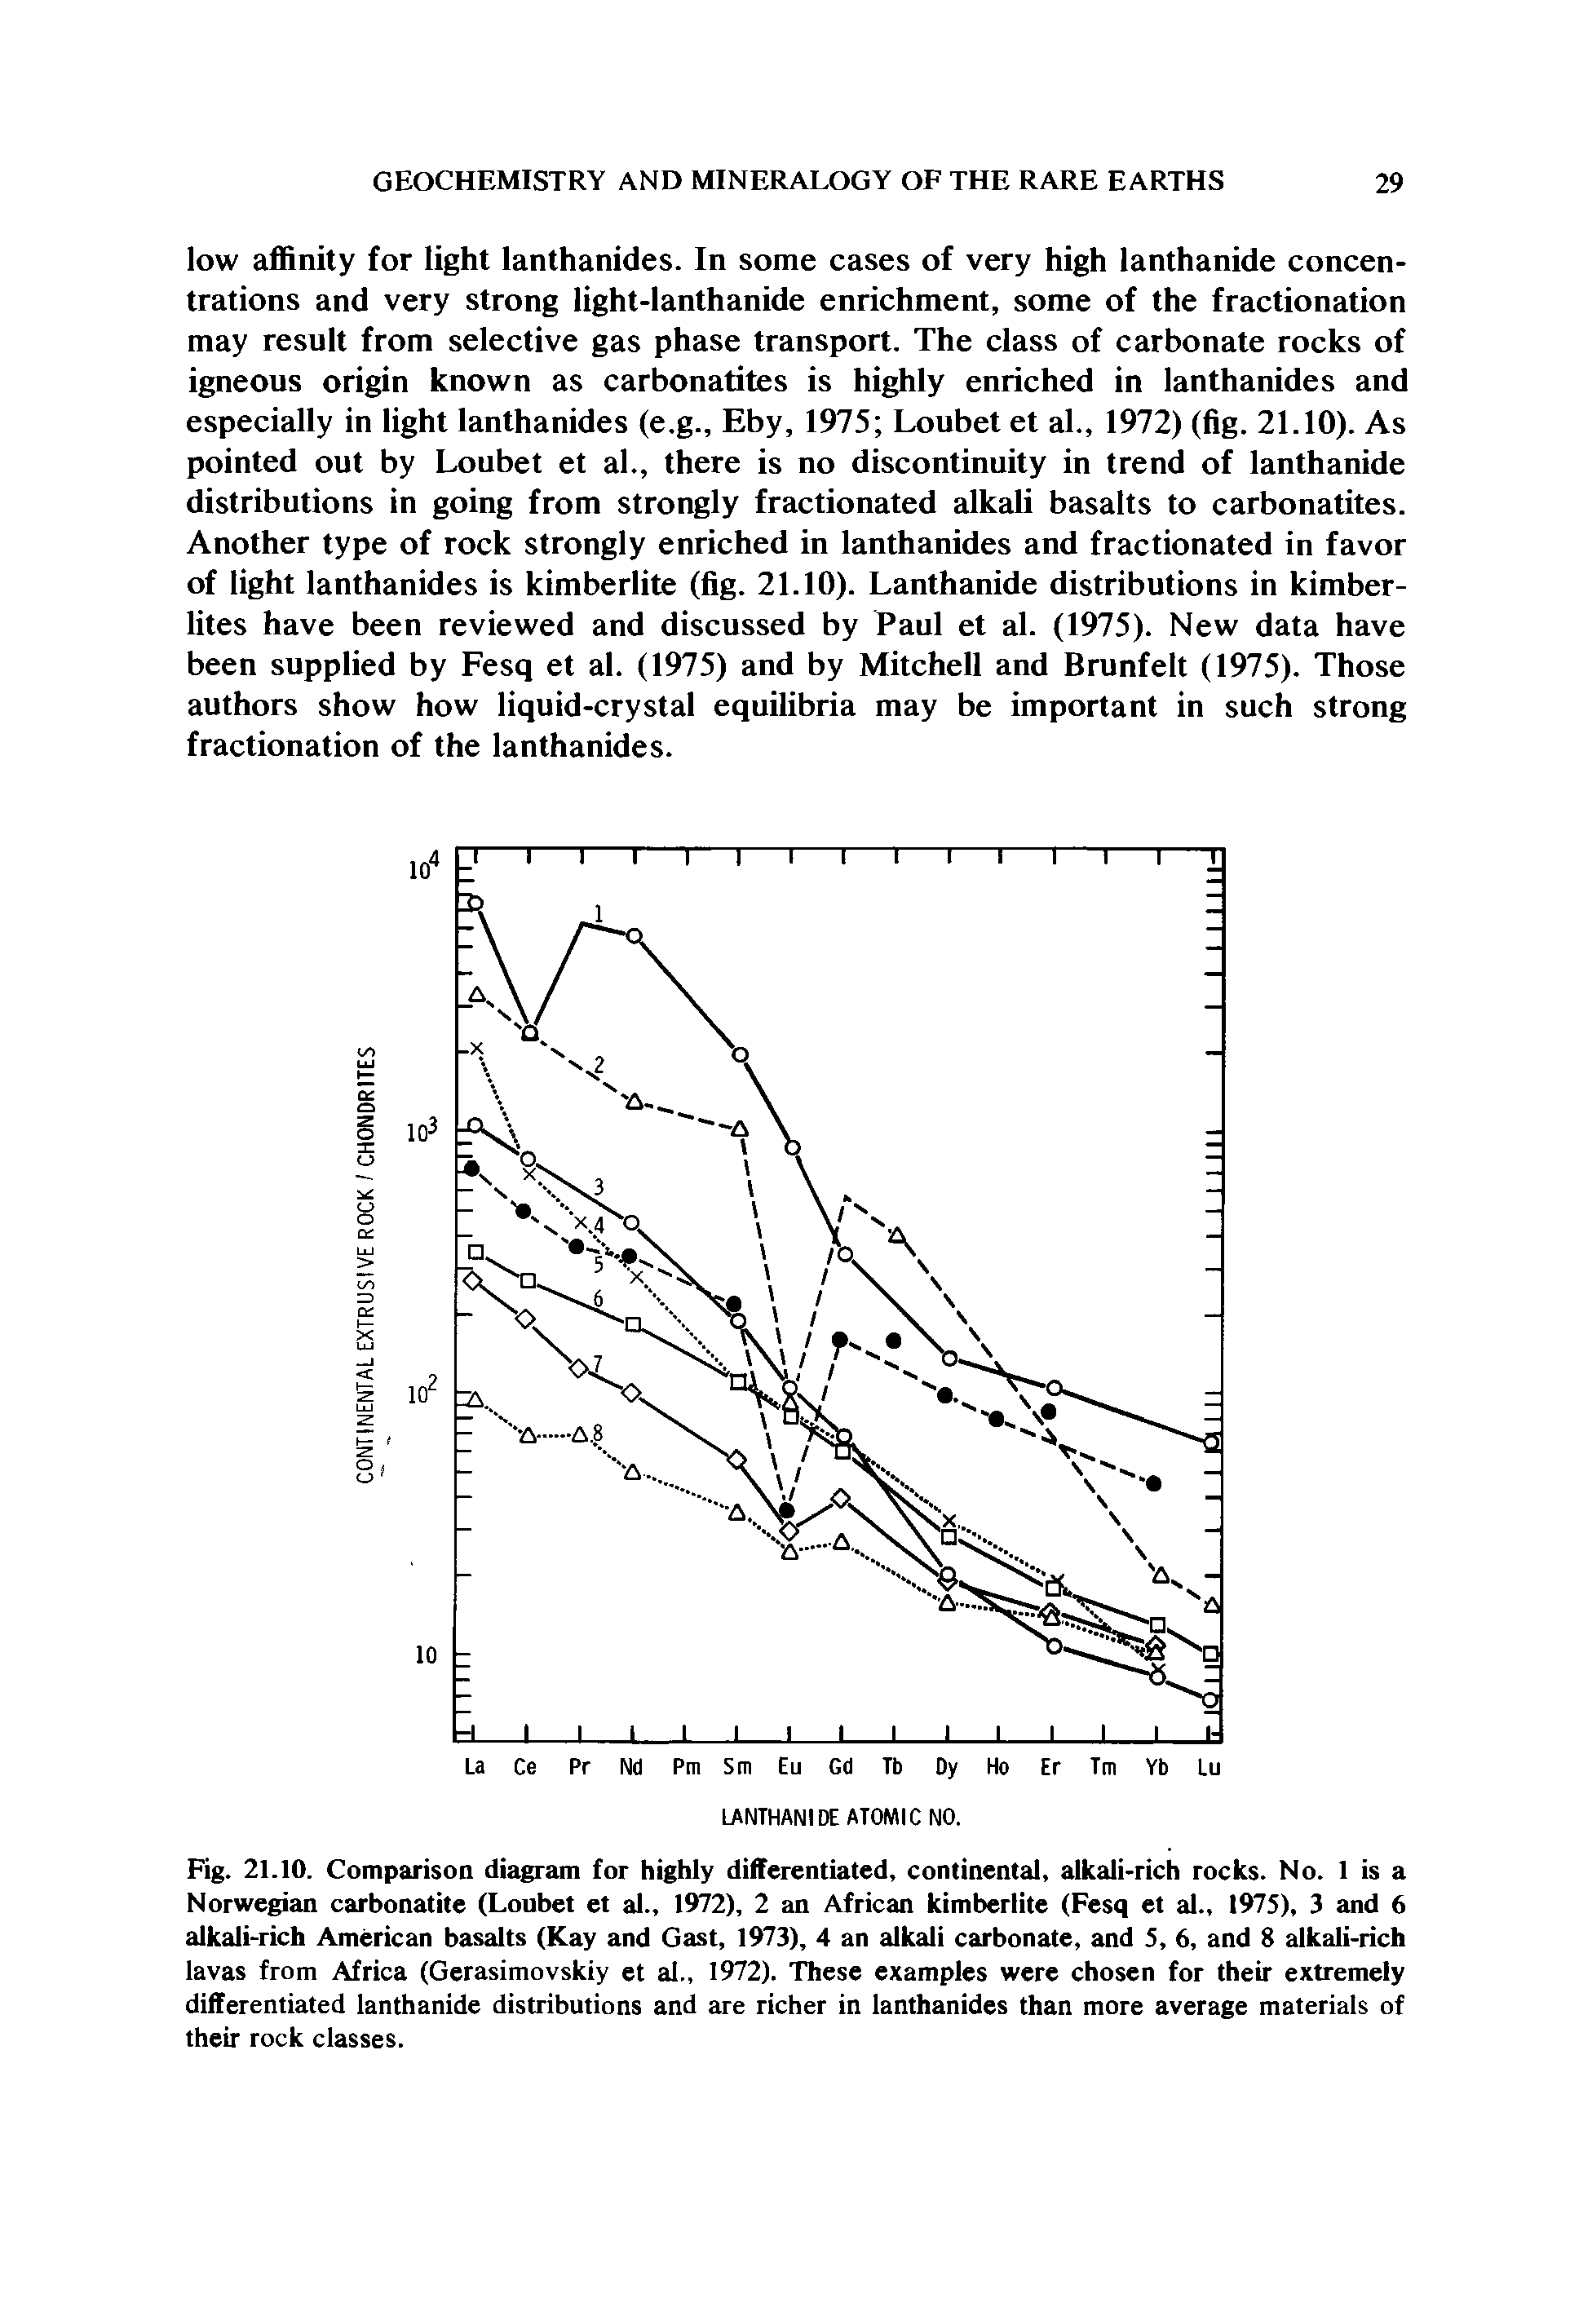 Fig. 21.10. Comparison diagram for highly differentiated, continental, alkali-rich rocks. No. 1 is a Norwegian carbonatite (Loubet et al., 1972), 2 an African kimberlite (Fesq et al., 1975), 3 and 6 alkali-rich American basalts (Kay and Gast, 1973), 4 an alkali carbonate, and 5, 6, and 8 alkali-rich lavas from Africa (Gerasimovskiy et al., 1972). These examples were chosen for their extremely differentiated lanthanide distributions and are richer in lanthanides than more average materials of their rock classes.